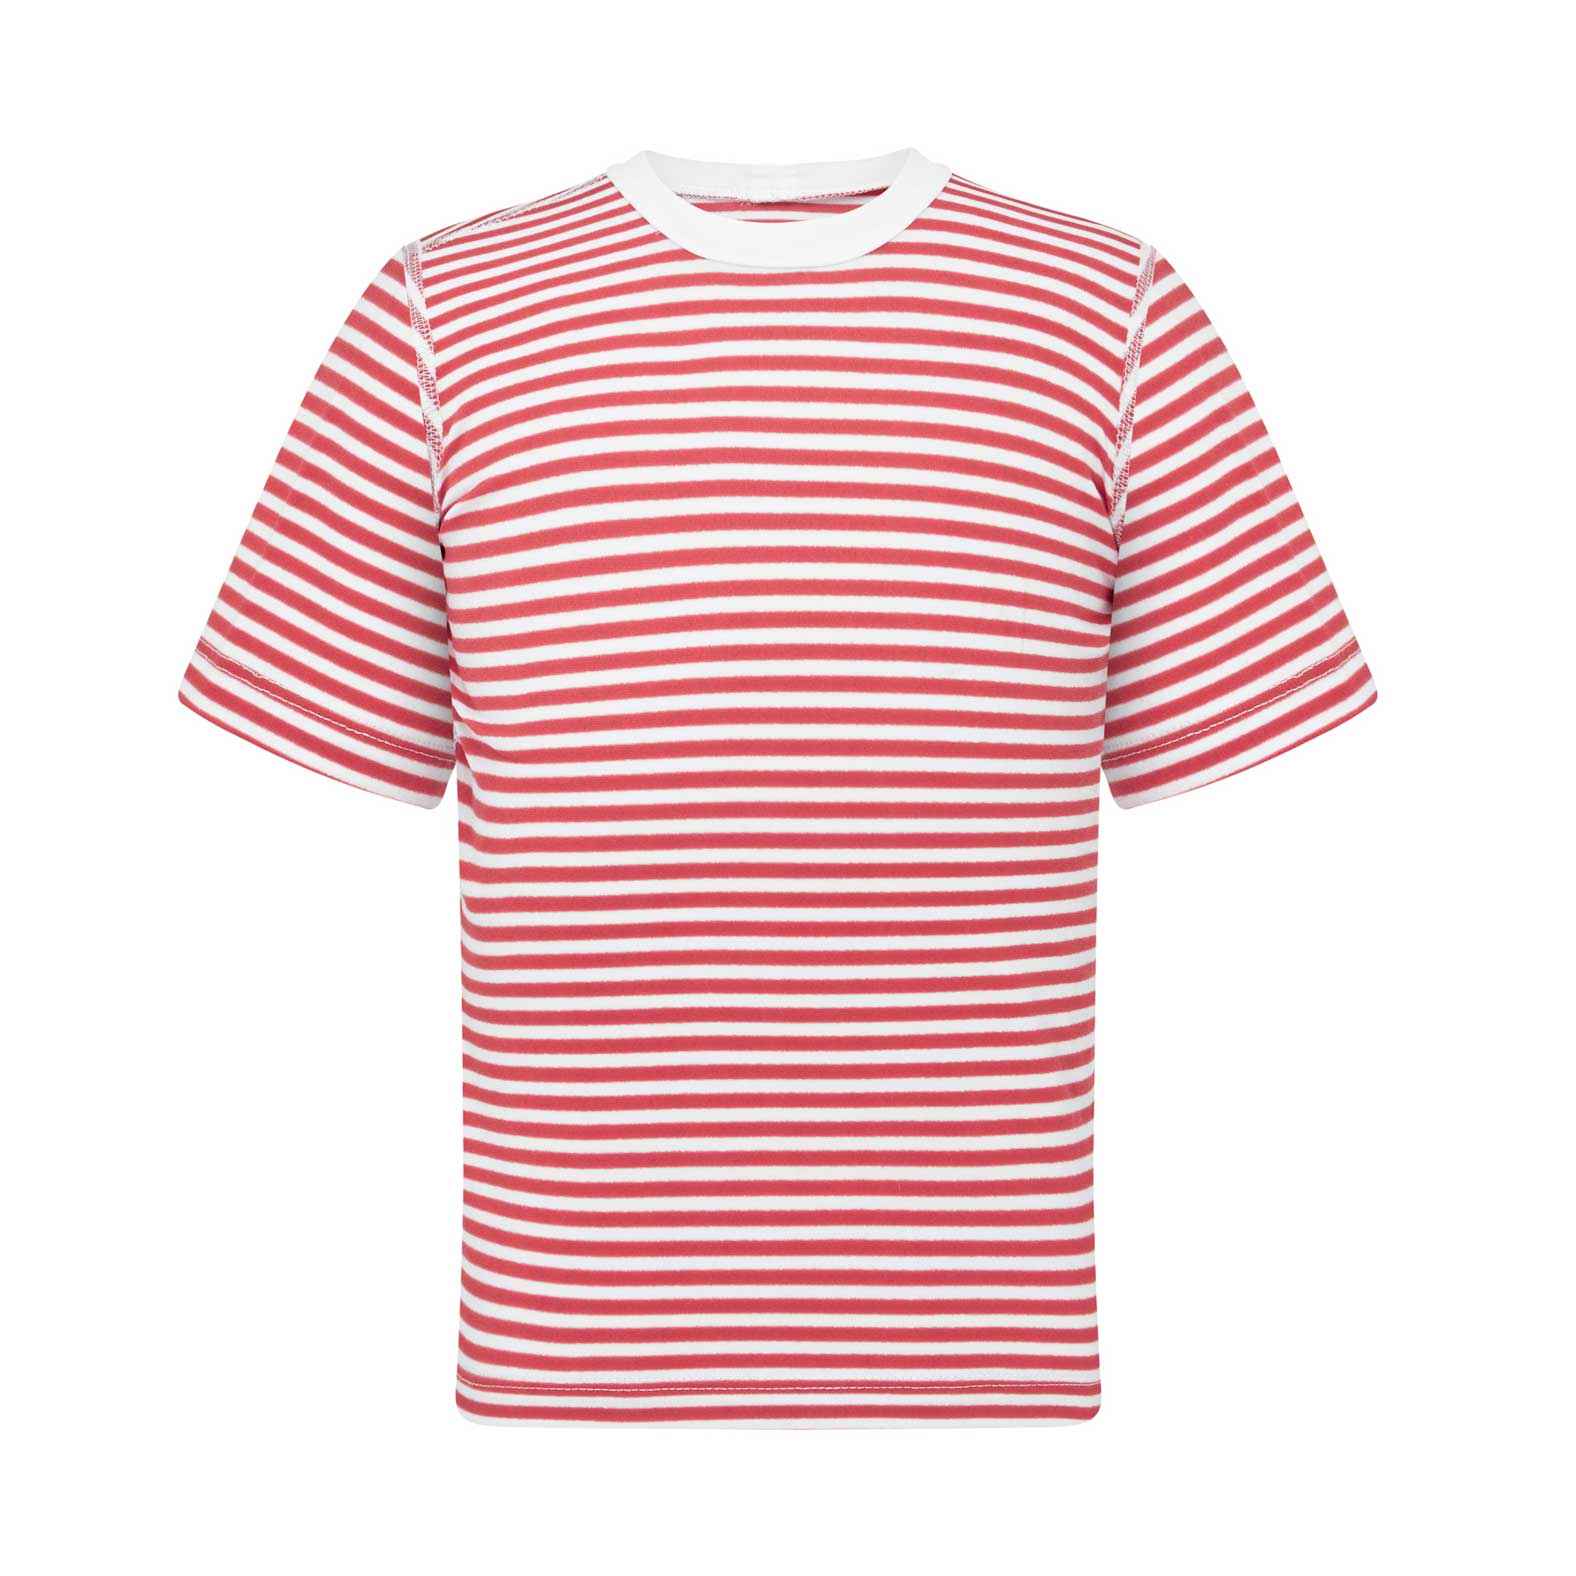 SHORT SLEEVED RASHIE IN Red Stripe - The Bathers Company